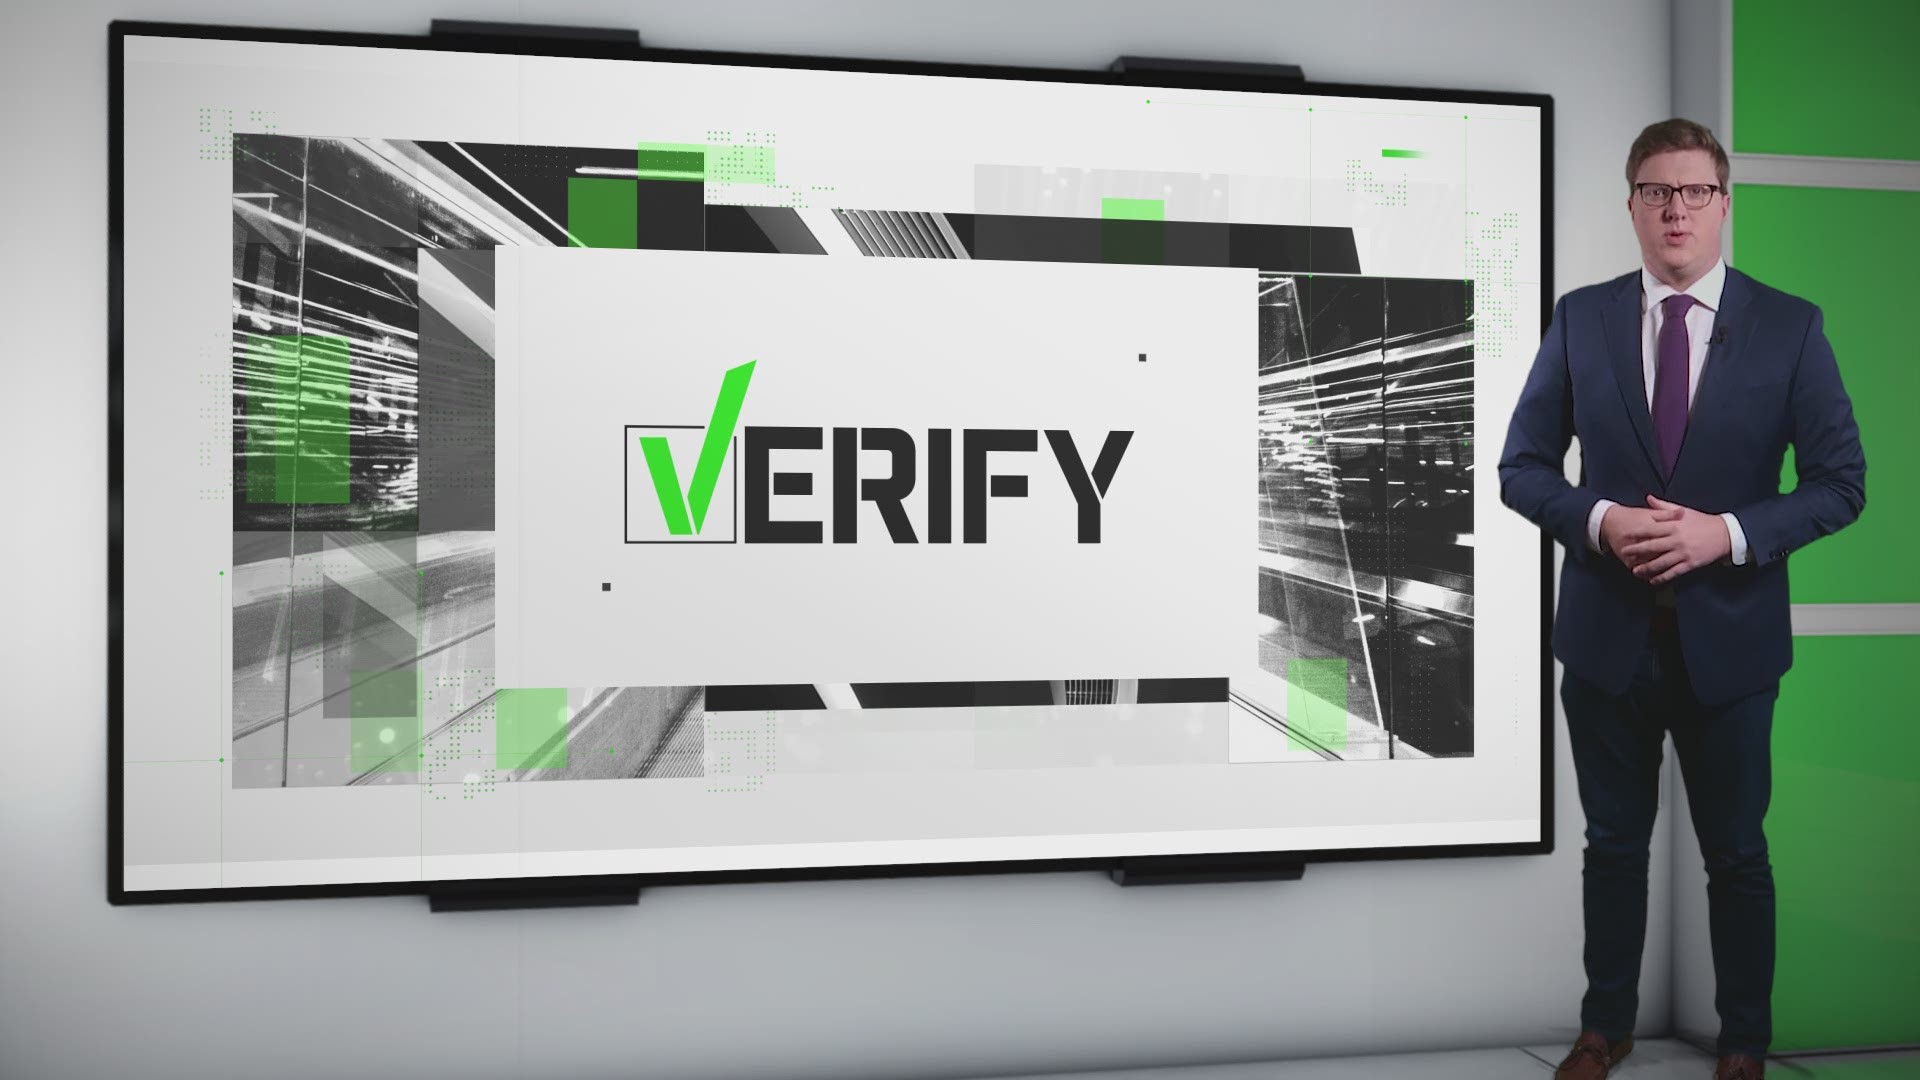 The VERIFY team breaks down a few questions that people began talking about following the riot at the U.S. Capitol.